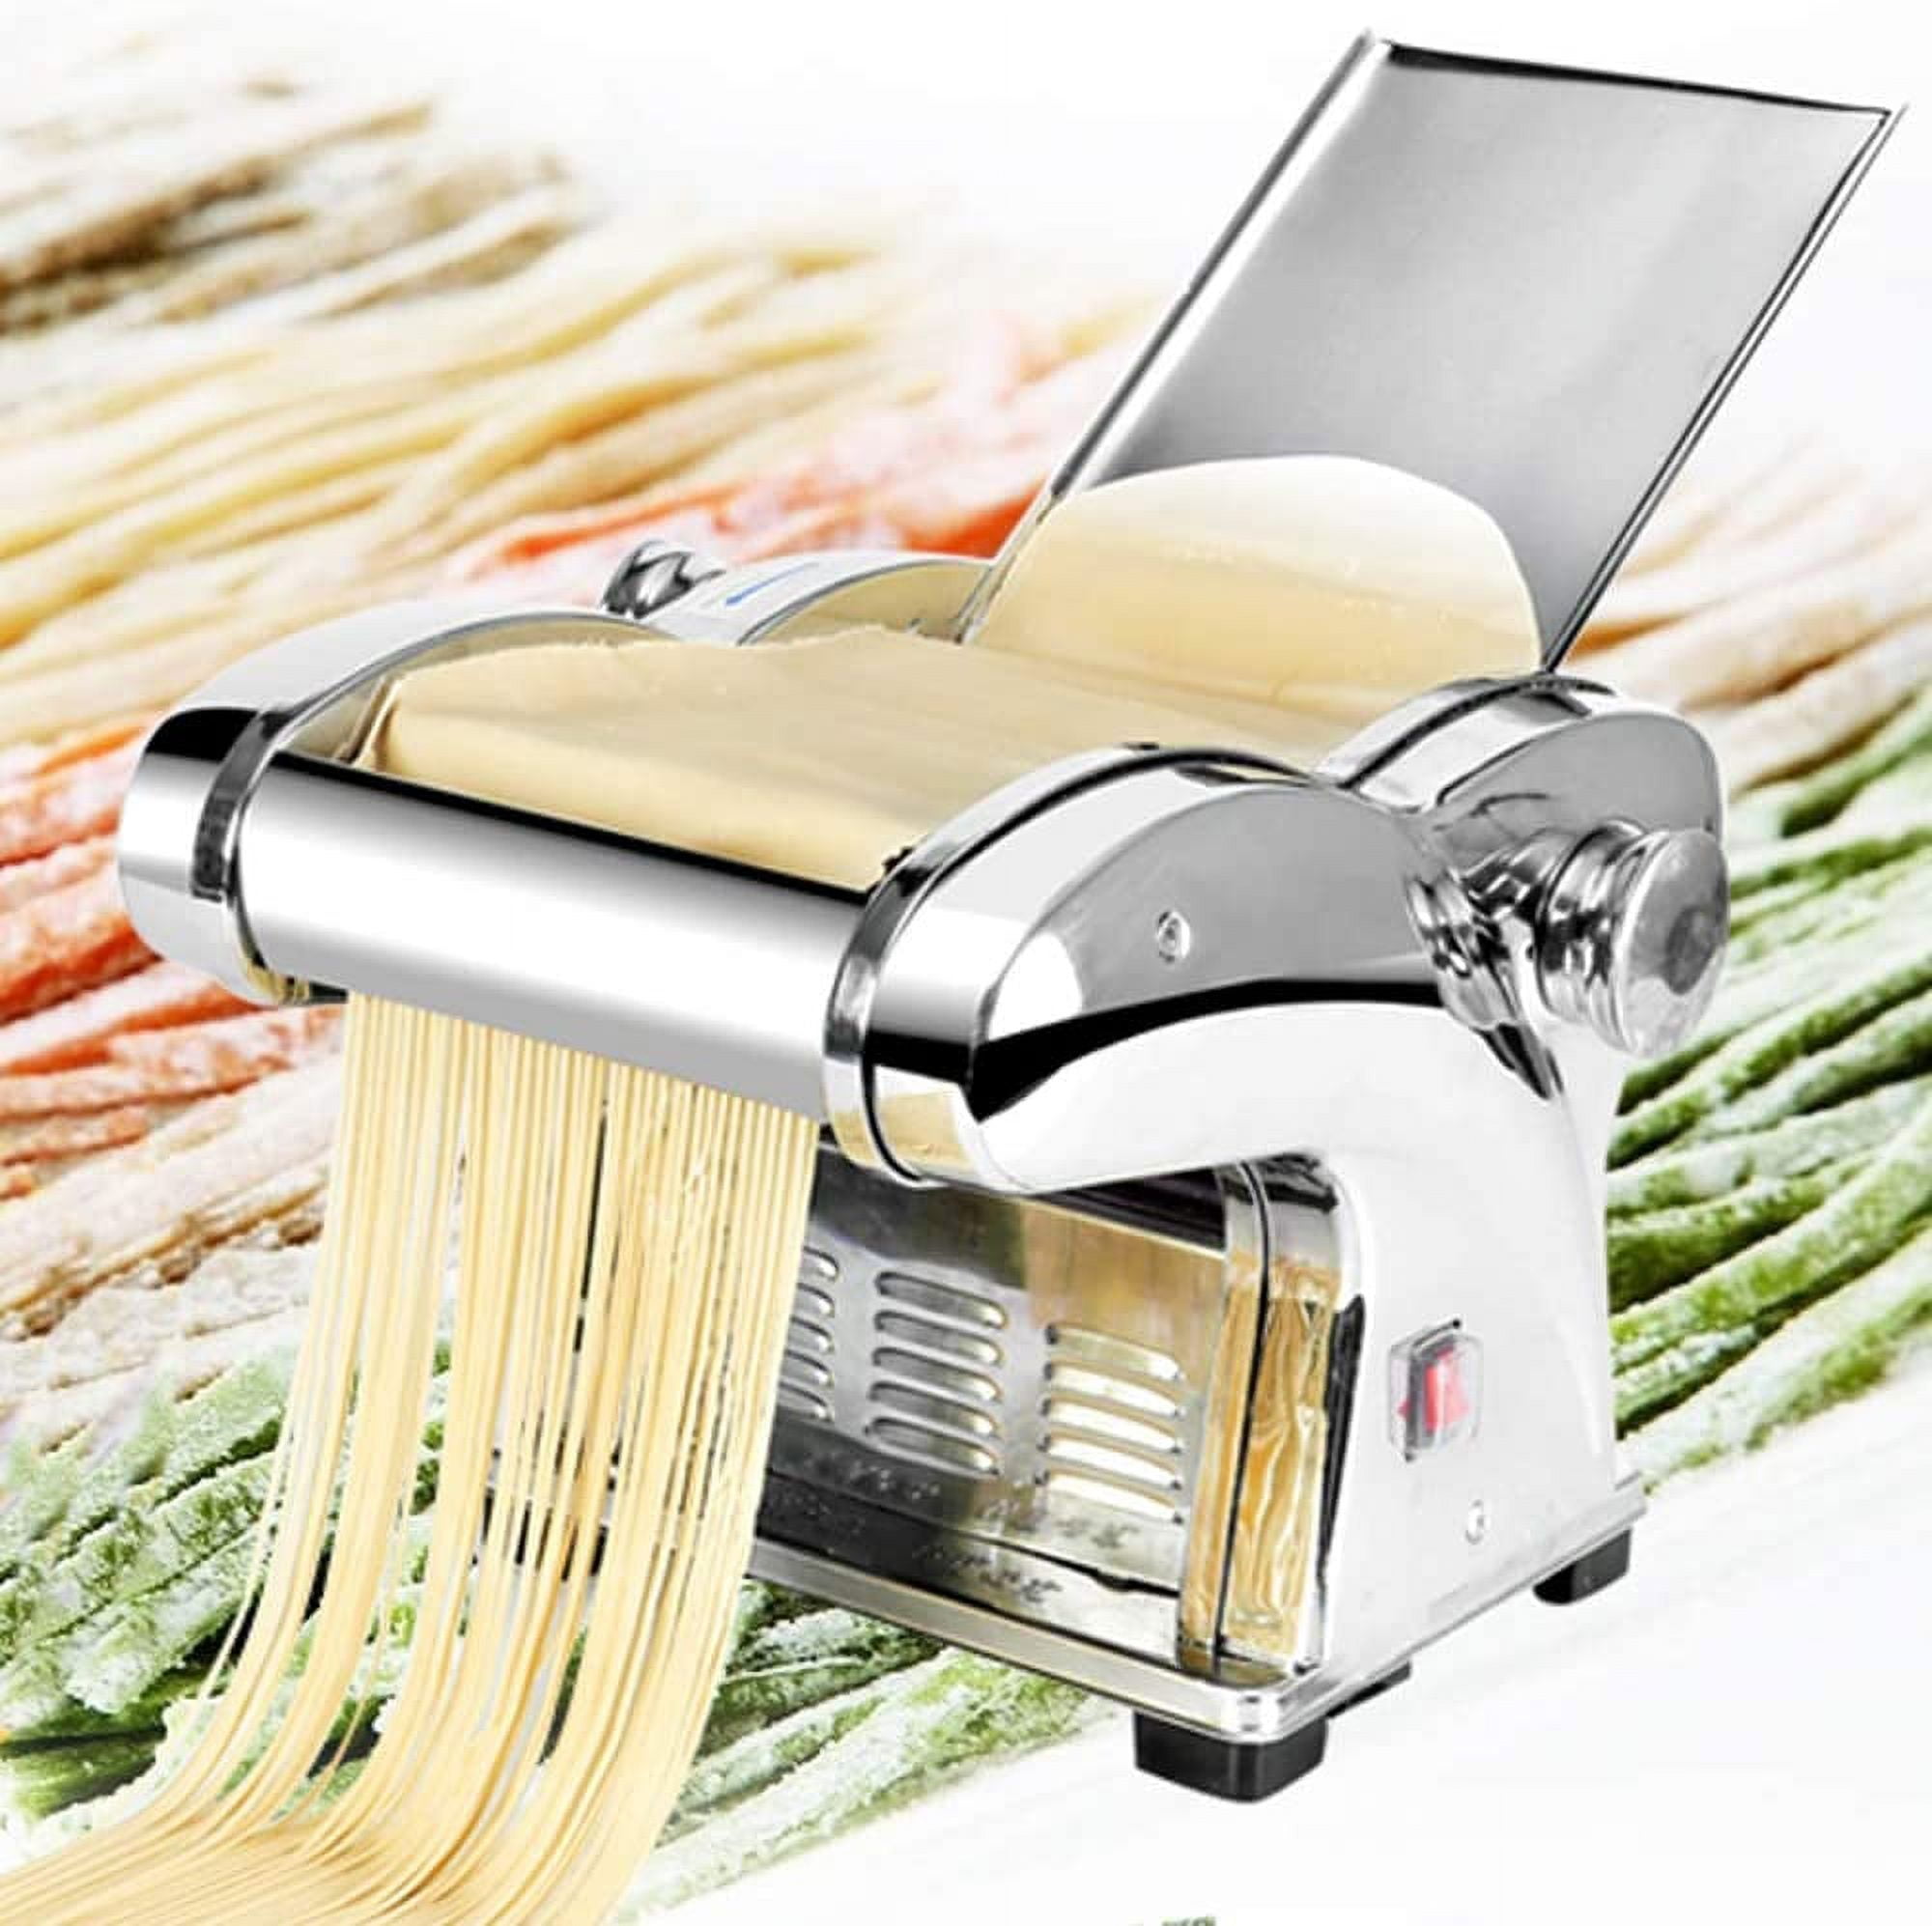 Topchances 550W Electric Pasta Maker, Automatic Noodle Machine, 2-in-1 Heavy Duty Stainless Steel Dough Roller Pressing Machine (Noodle Width: 3mm/9mm